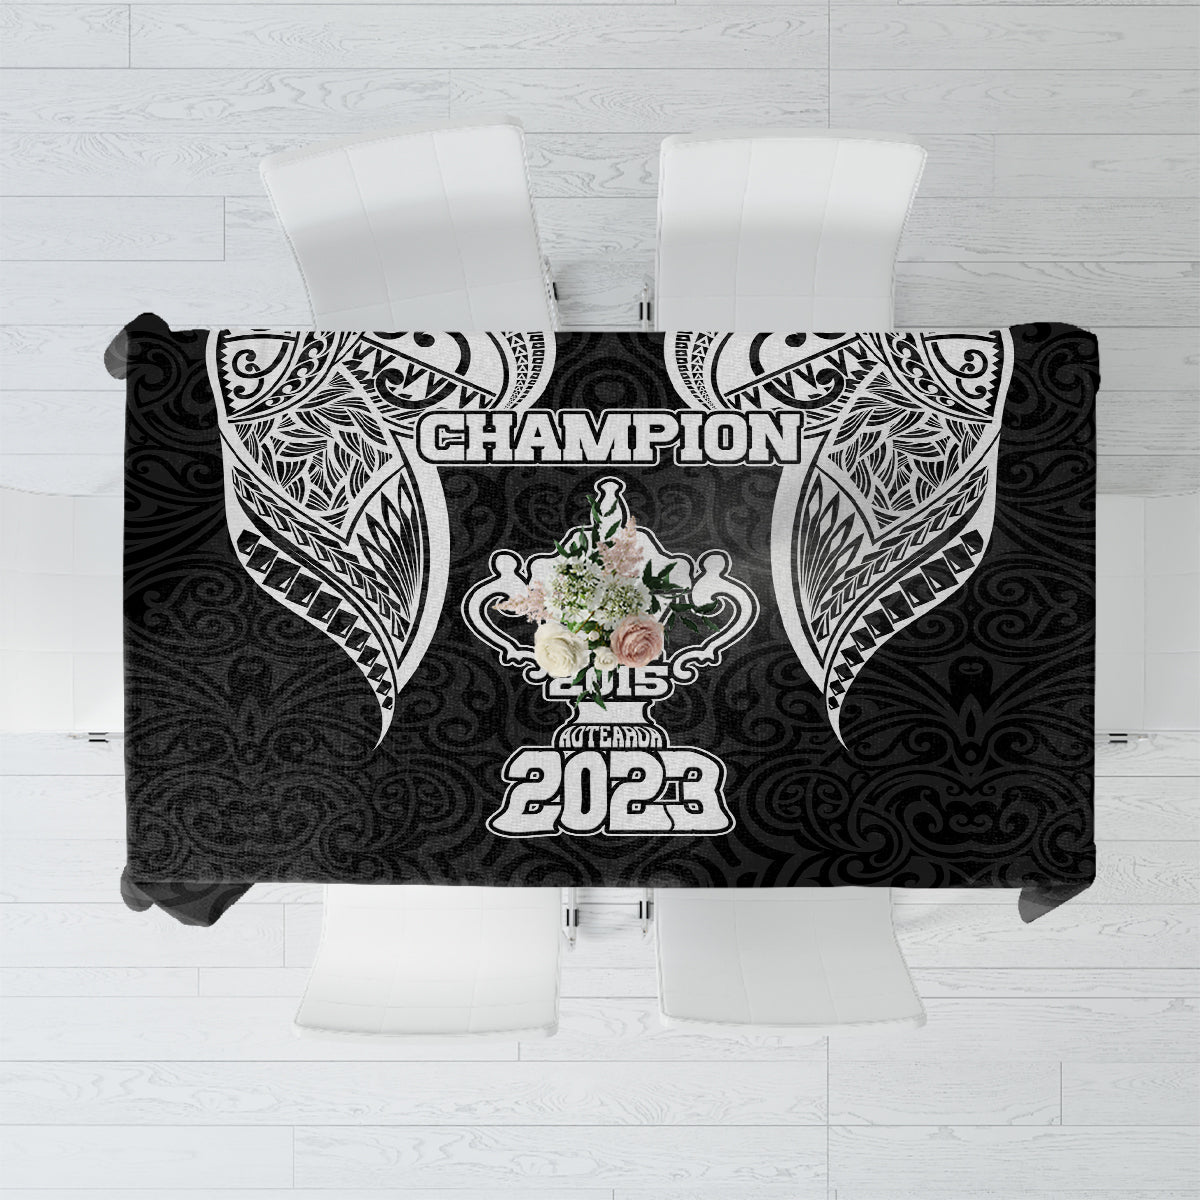 New Zealand Rugby Tablecloth Aotearoa Champion Cup History with Haka Dance LT03 Black - Polynesian Pride